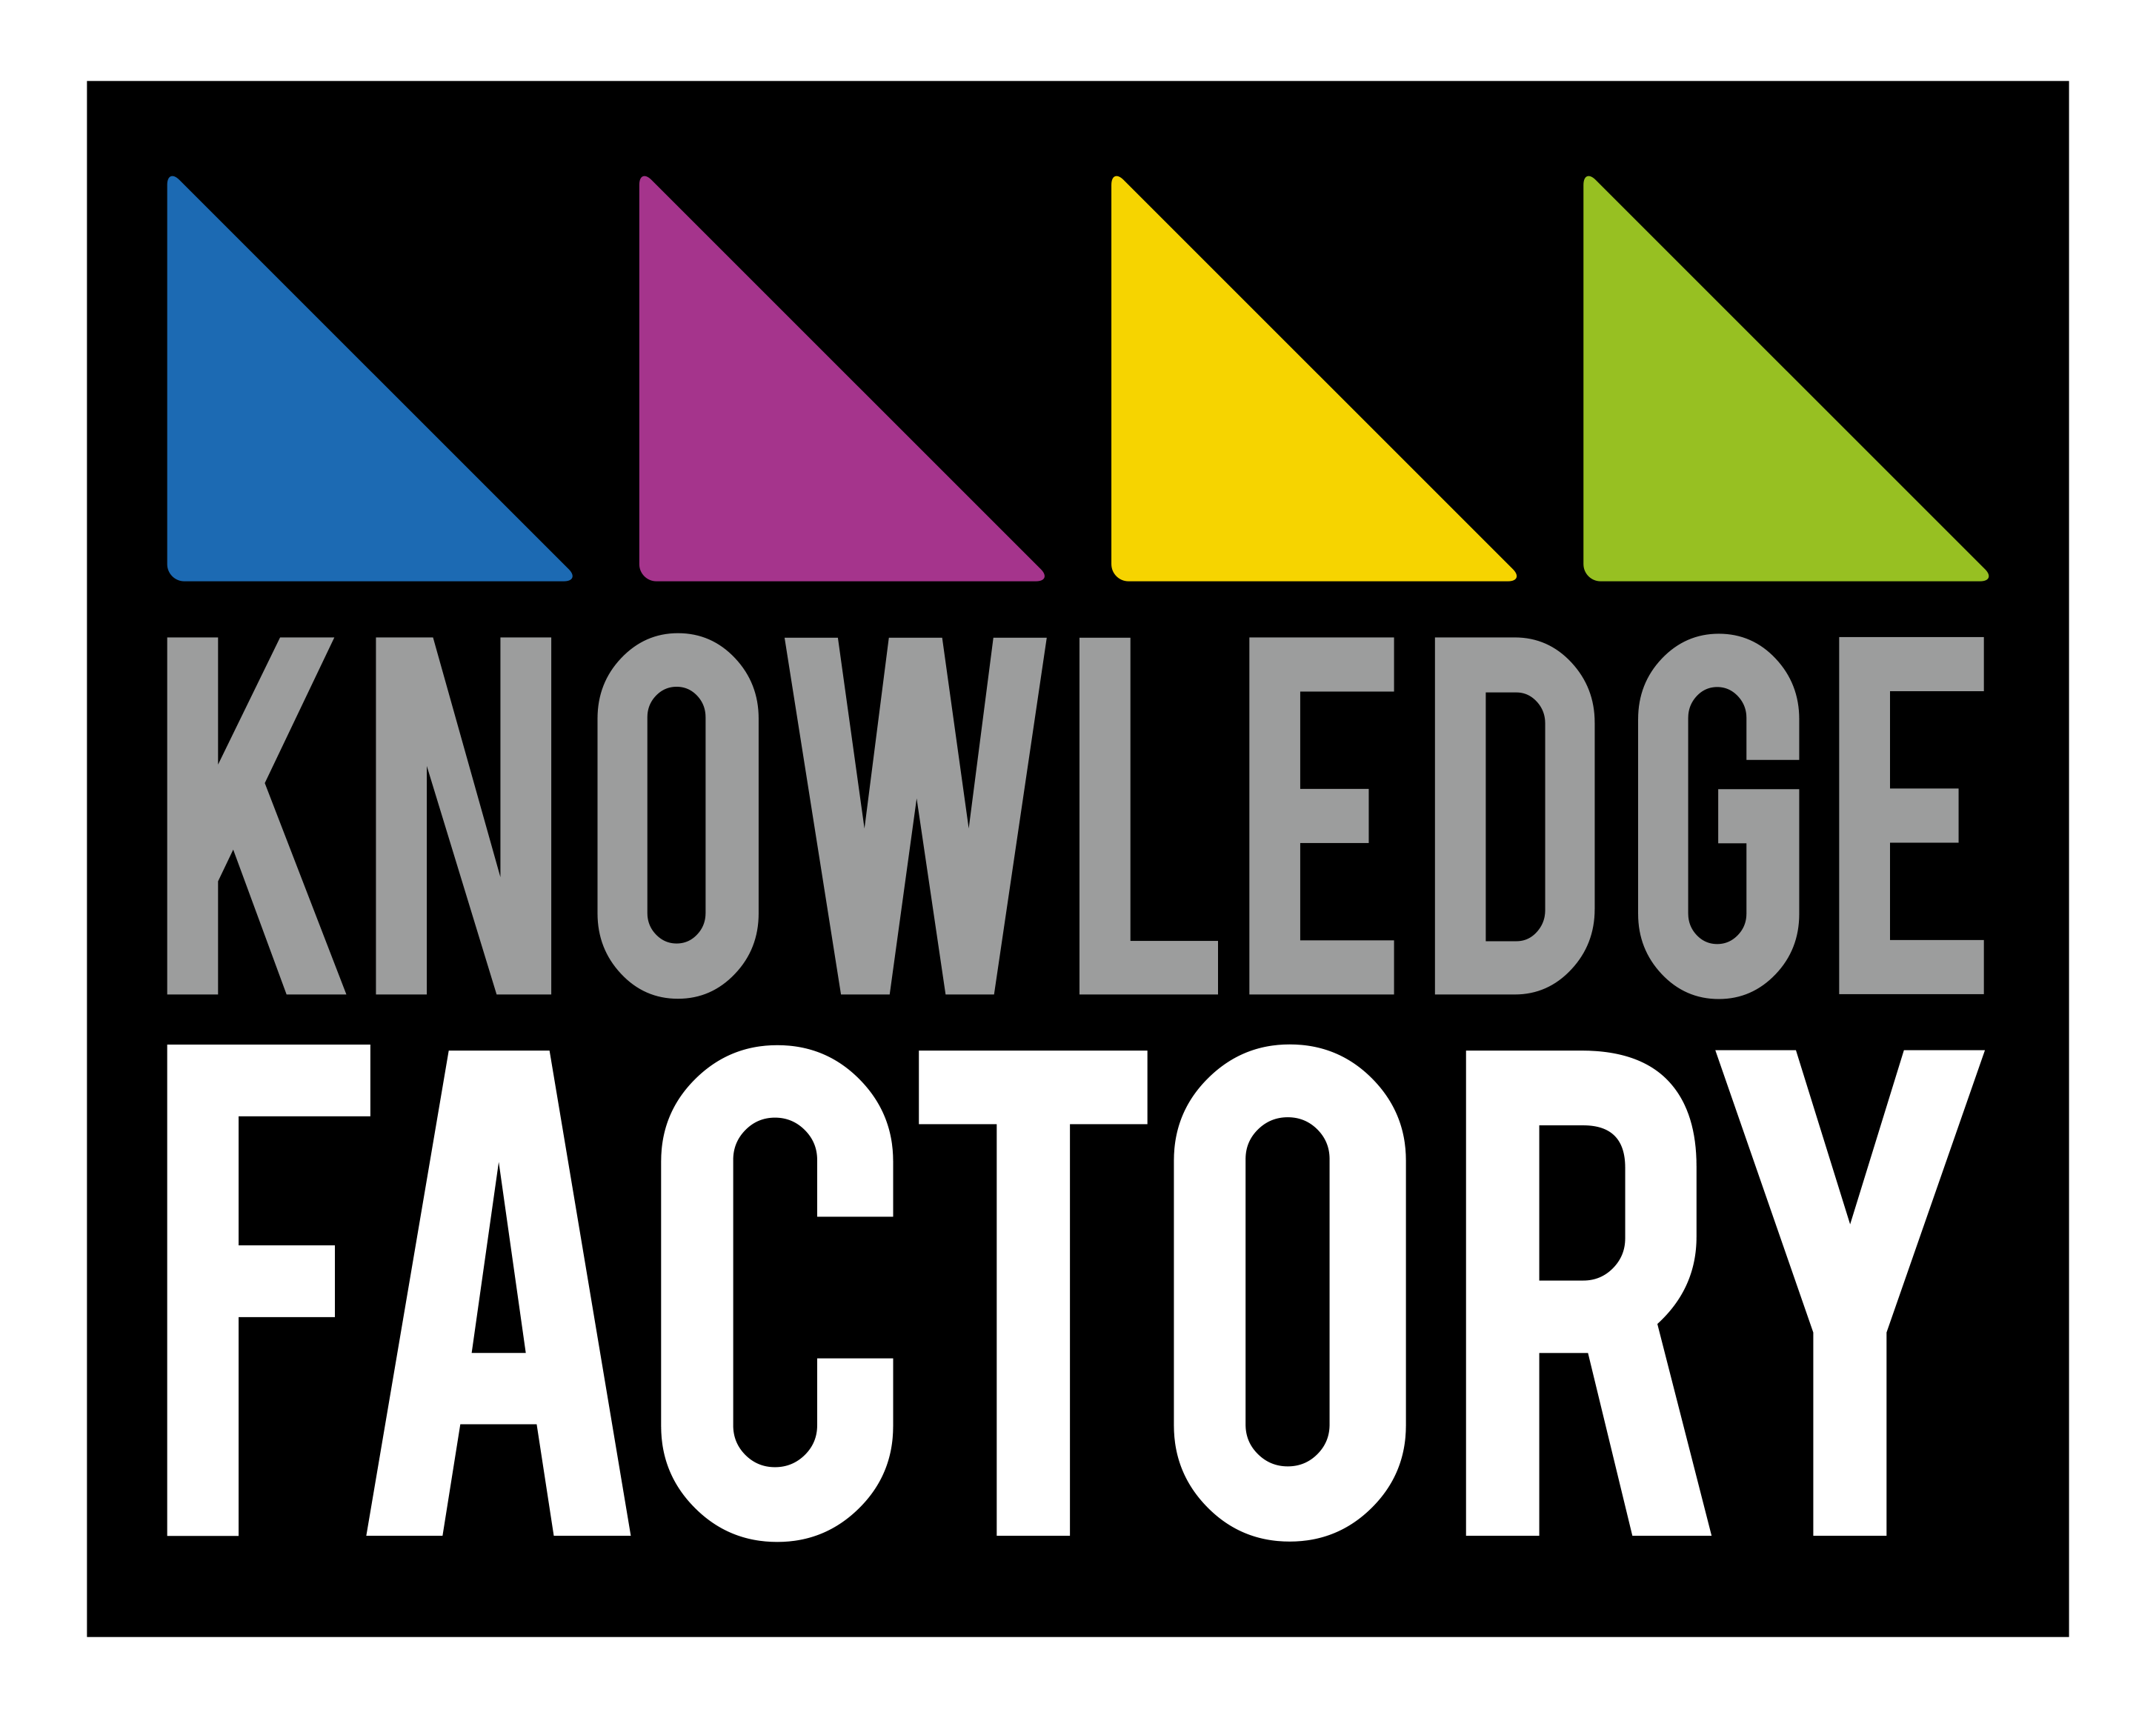 Knowledge_factory